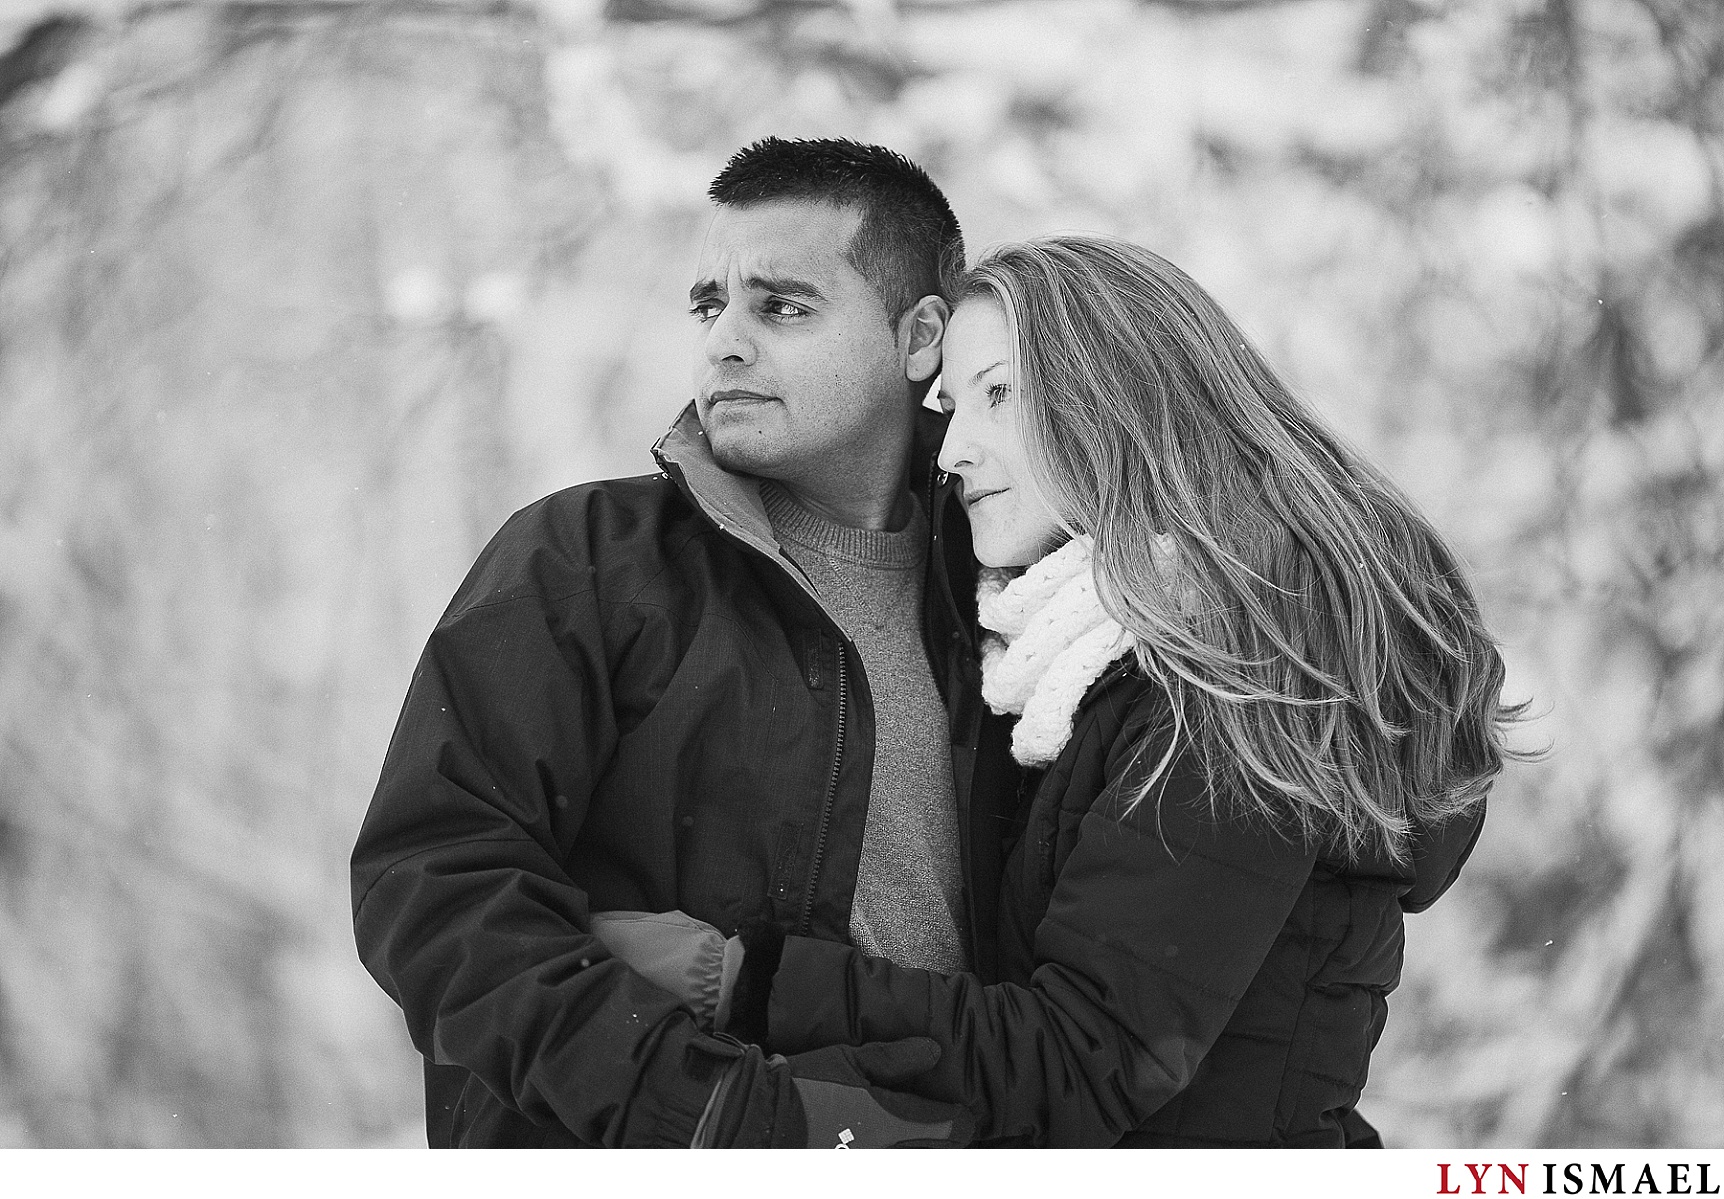 A black and white portrait of an engaged couple.